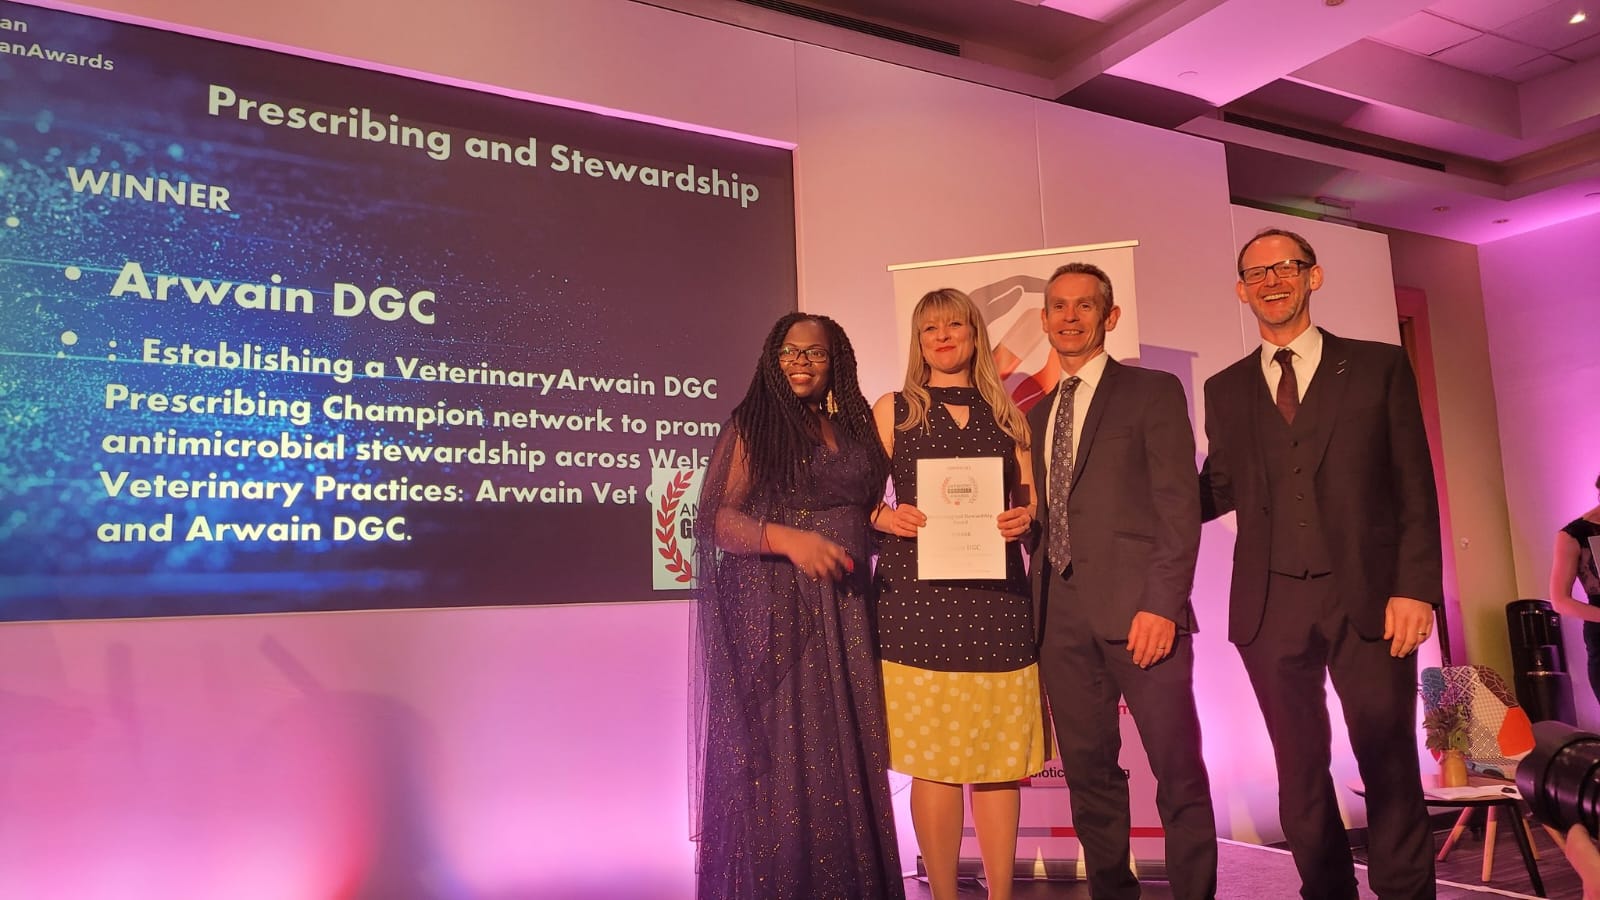 Arwain DGC wins Antibiotic Guardian 2022 Awards, supported by GW4 AMR Alliance researchers